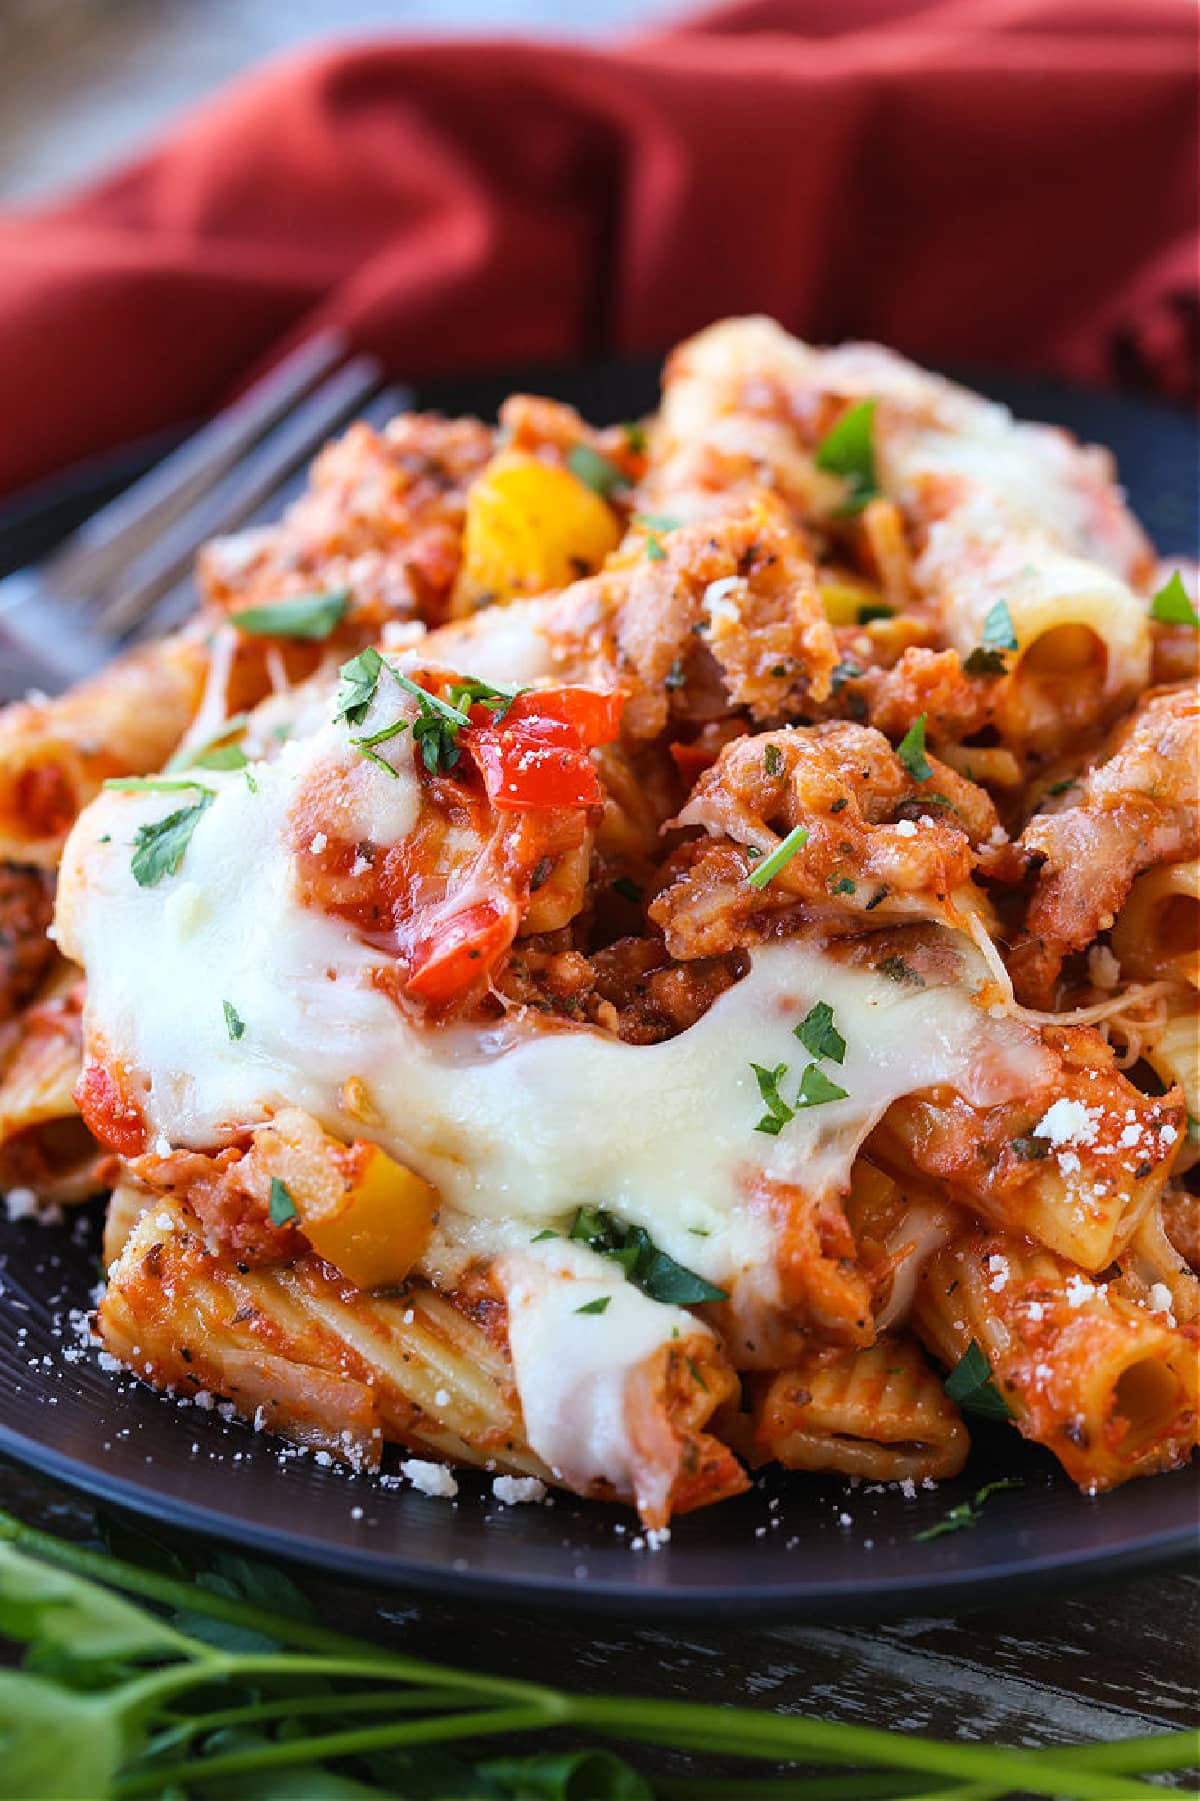 baked ziti with sausage and peppers on plate